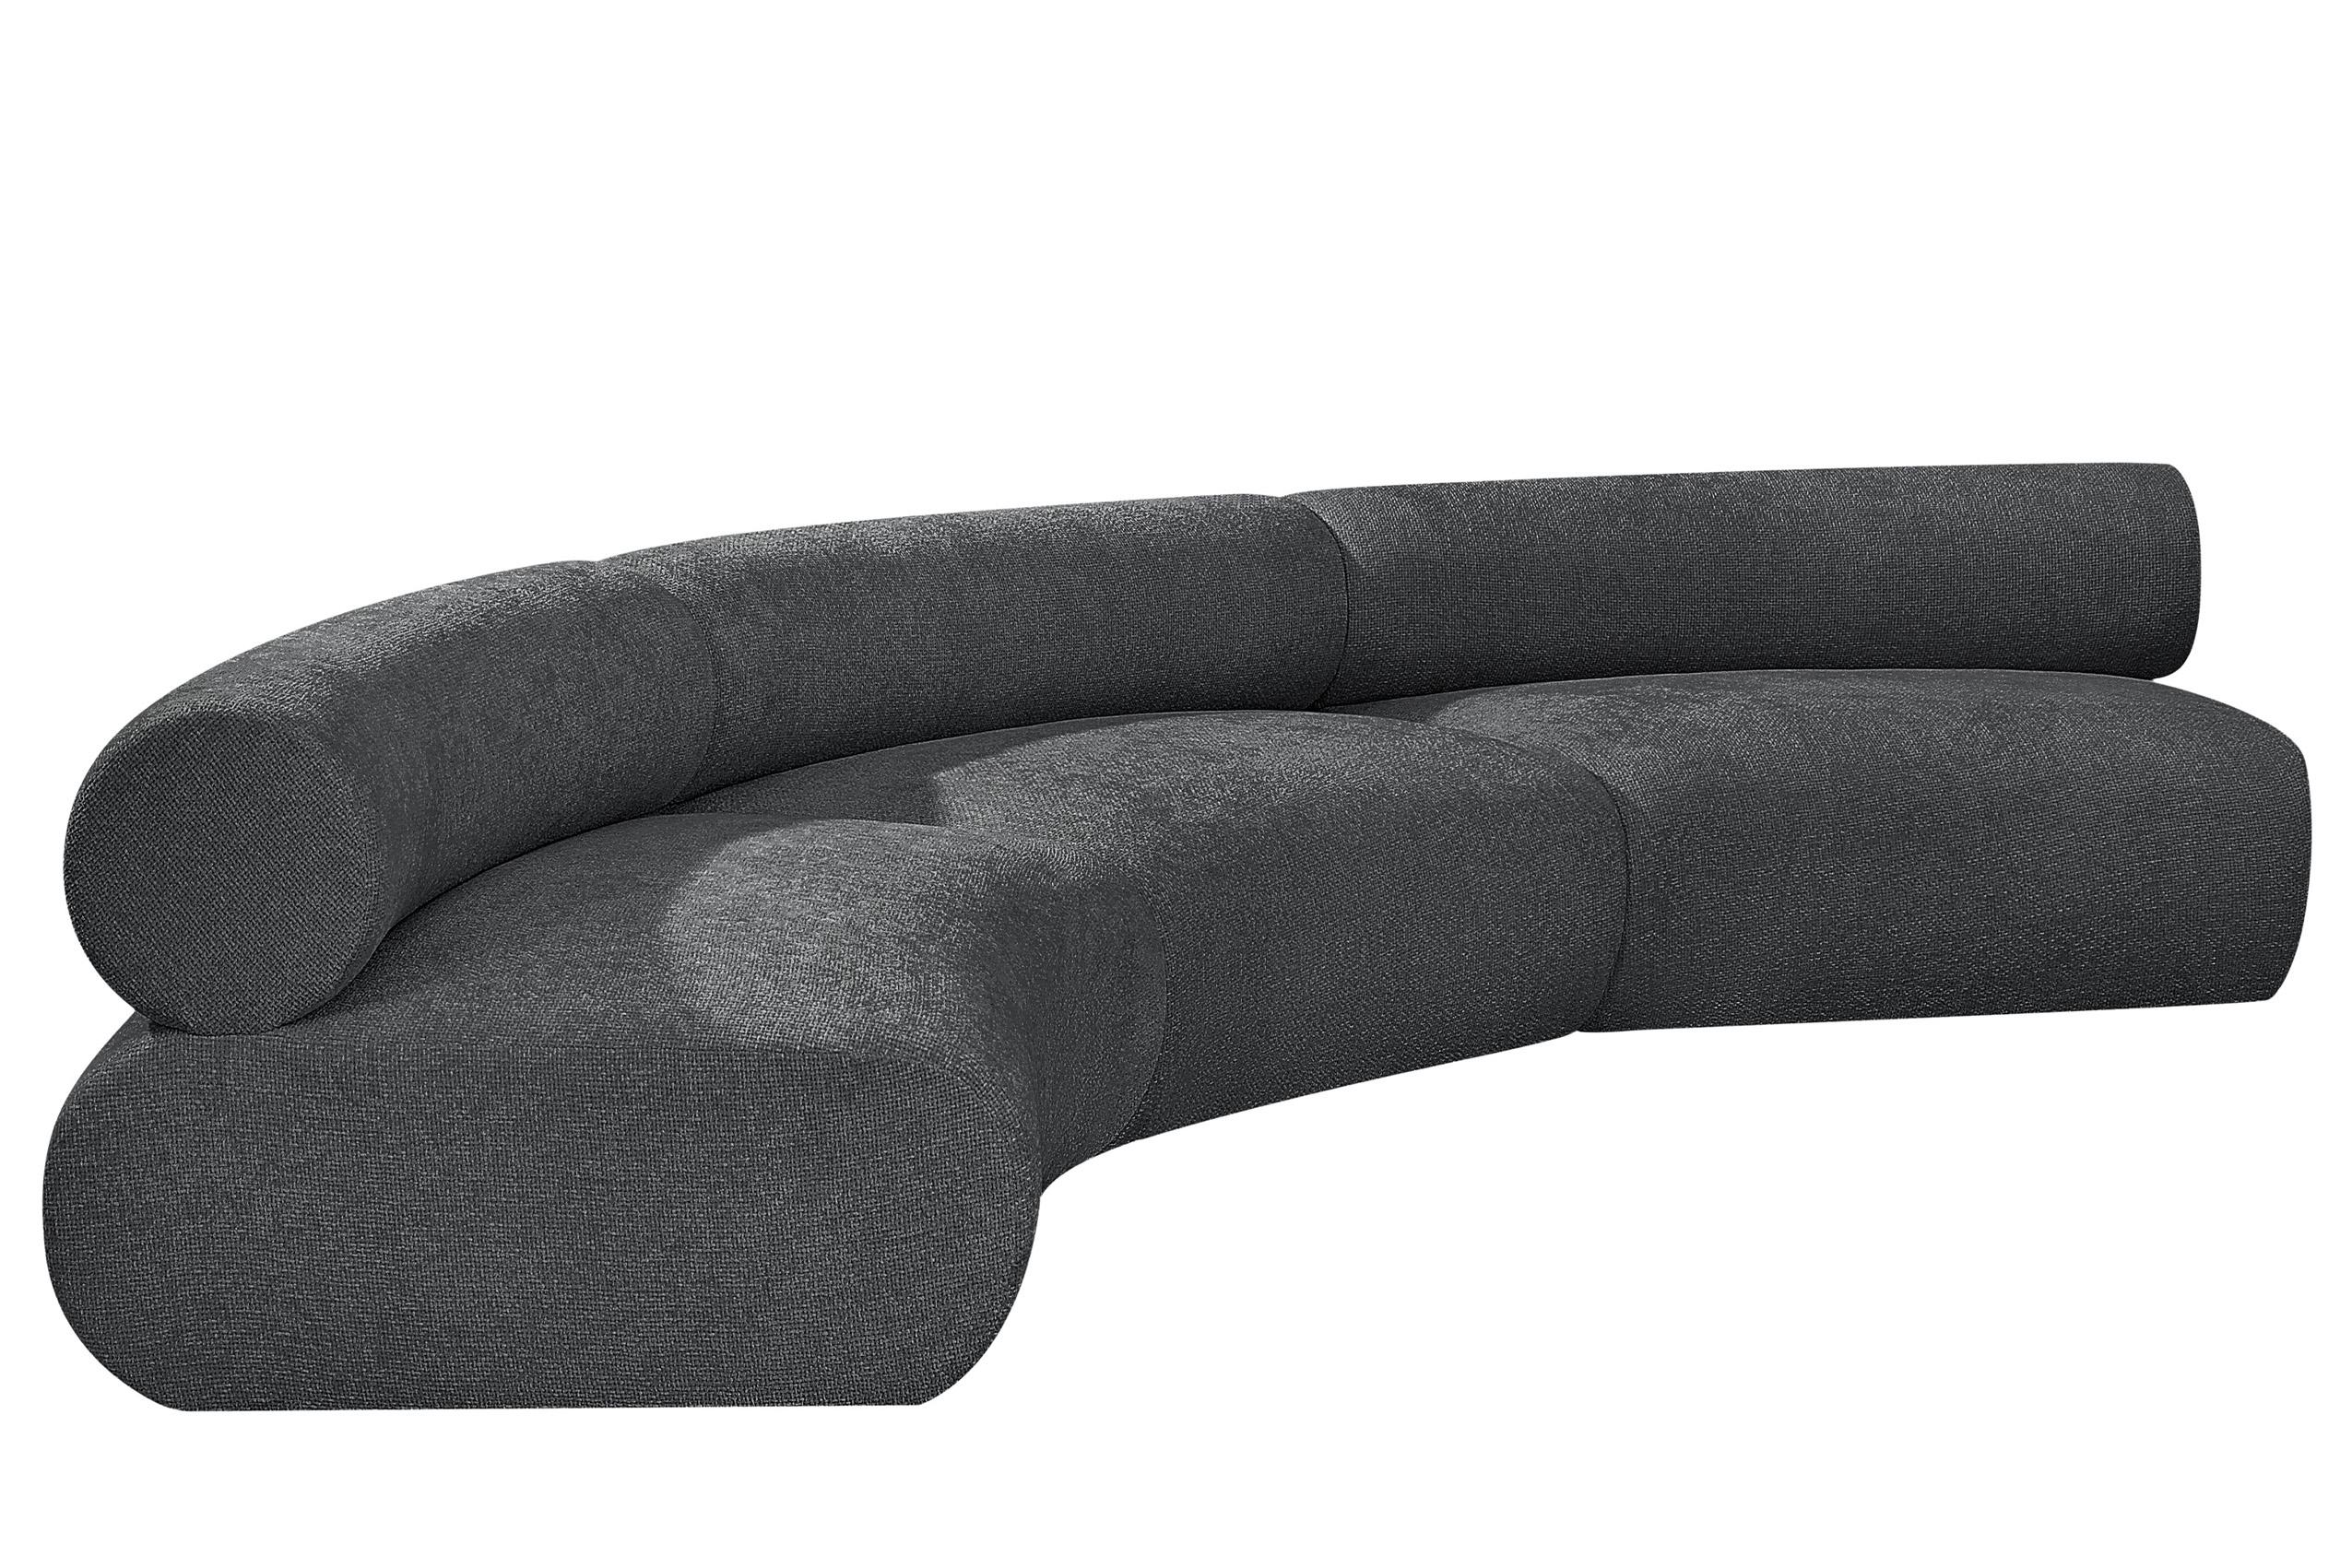 Contemporary, Modern Modular Sectional Sofa Bale 114Grey-S3A 114Grey-S3A in Charcoal Grey Chenille